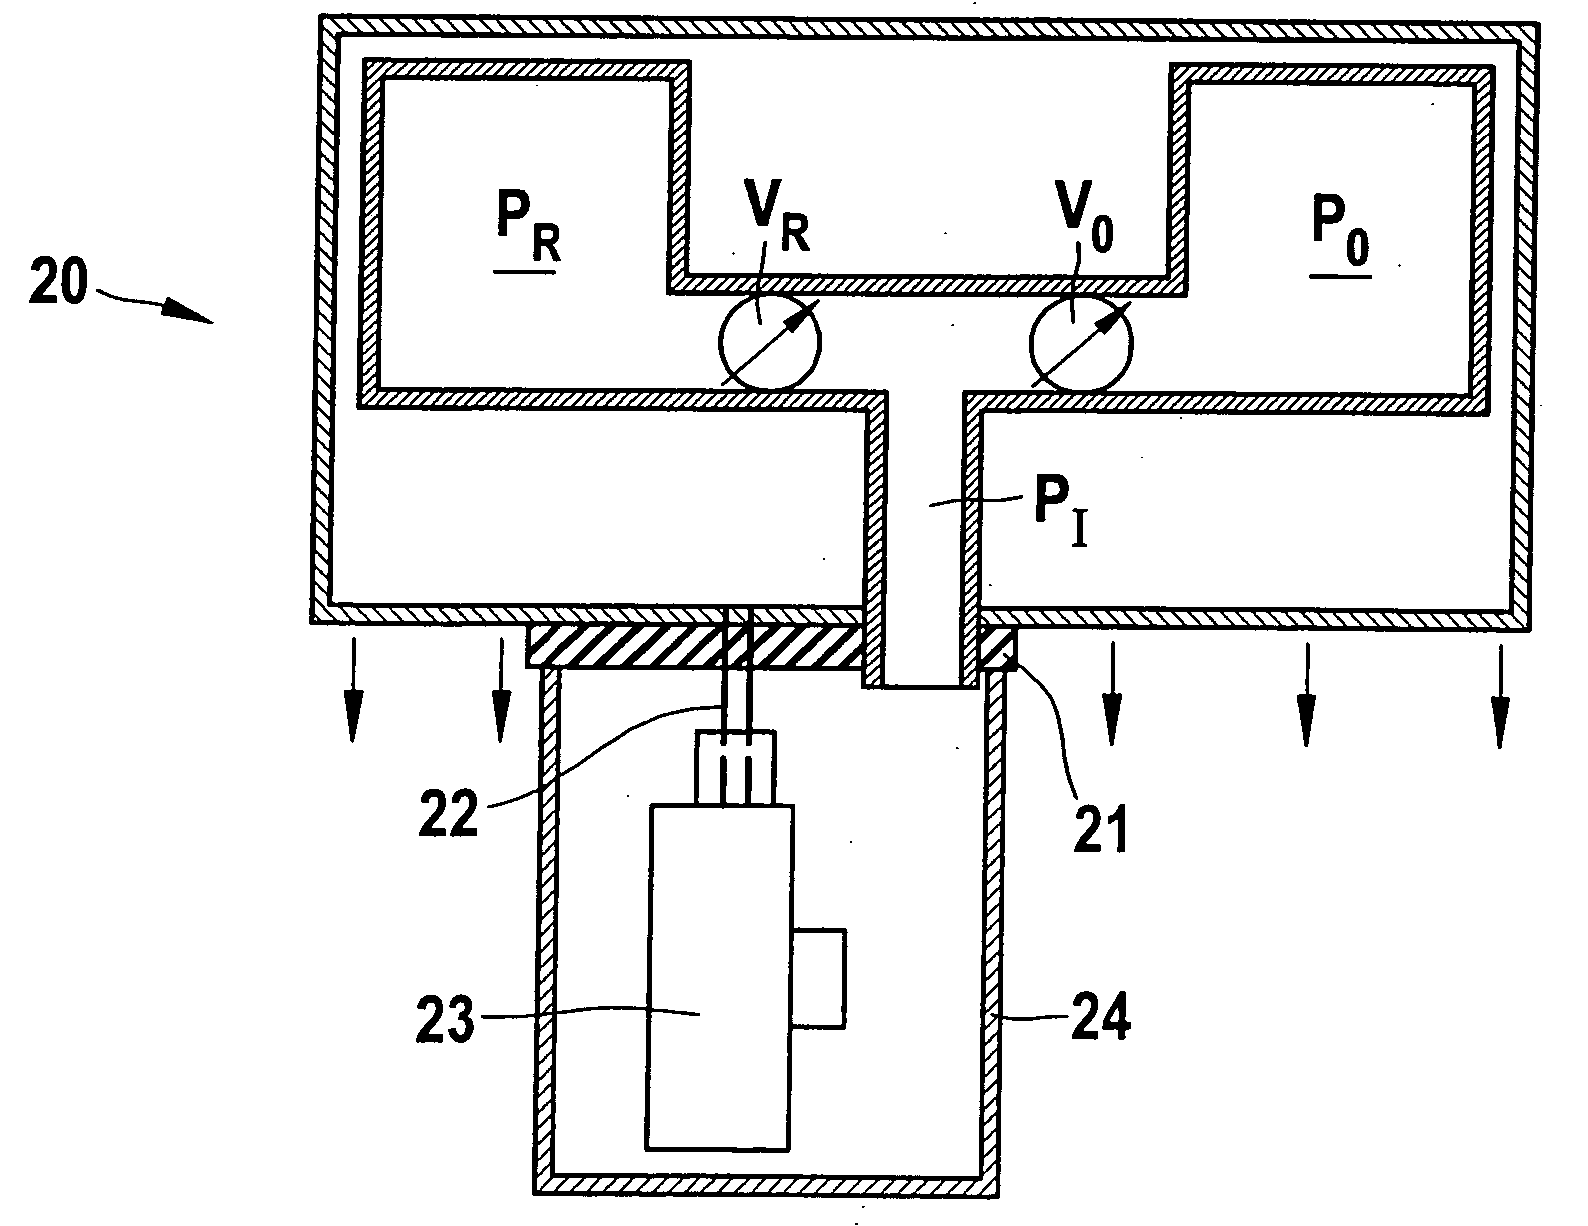 Device for testing at least one pressure sensor